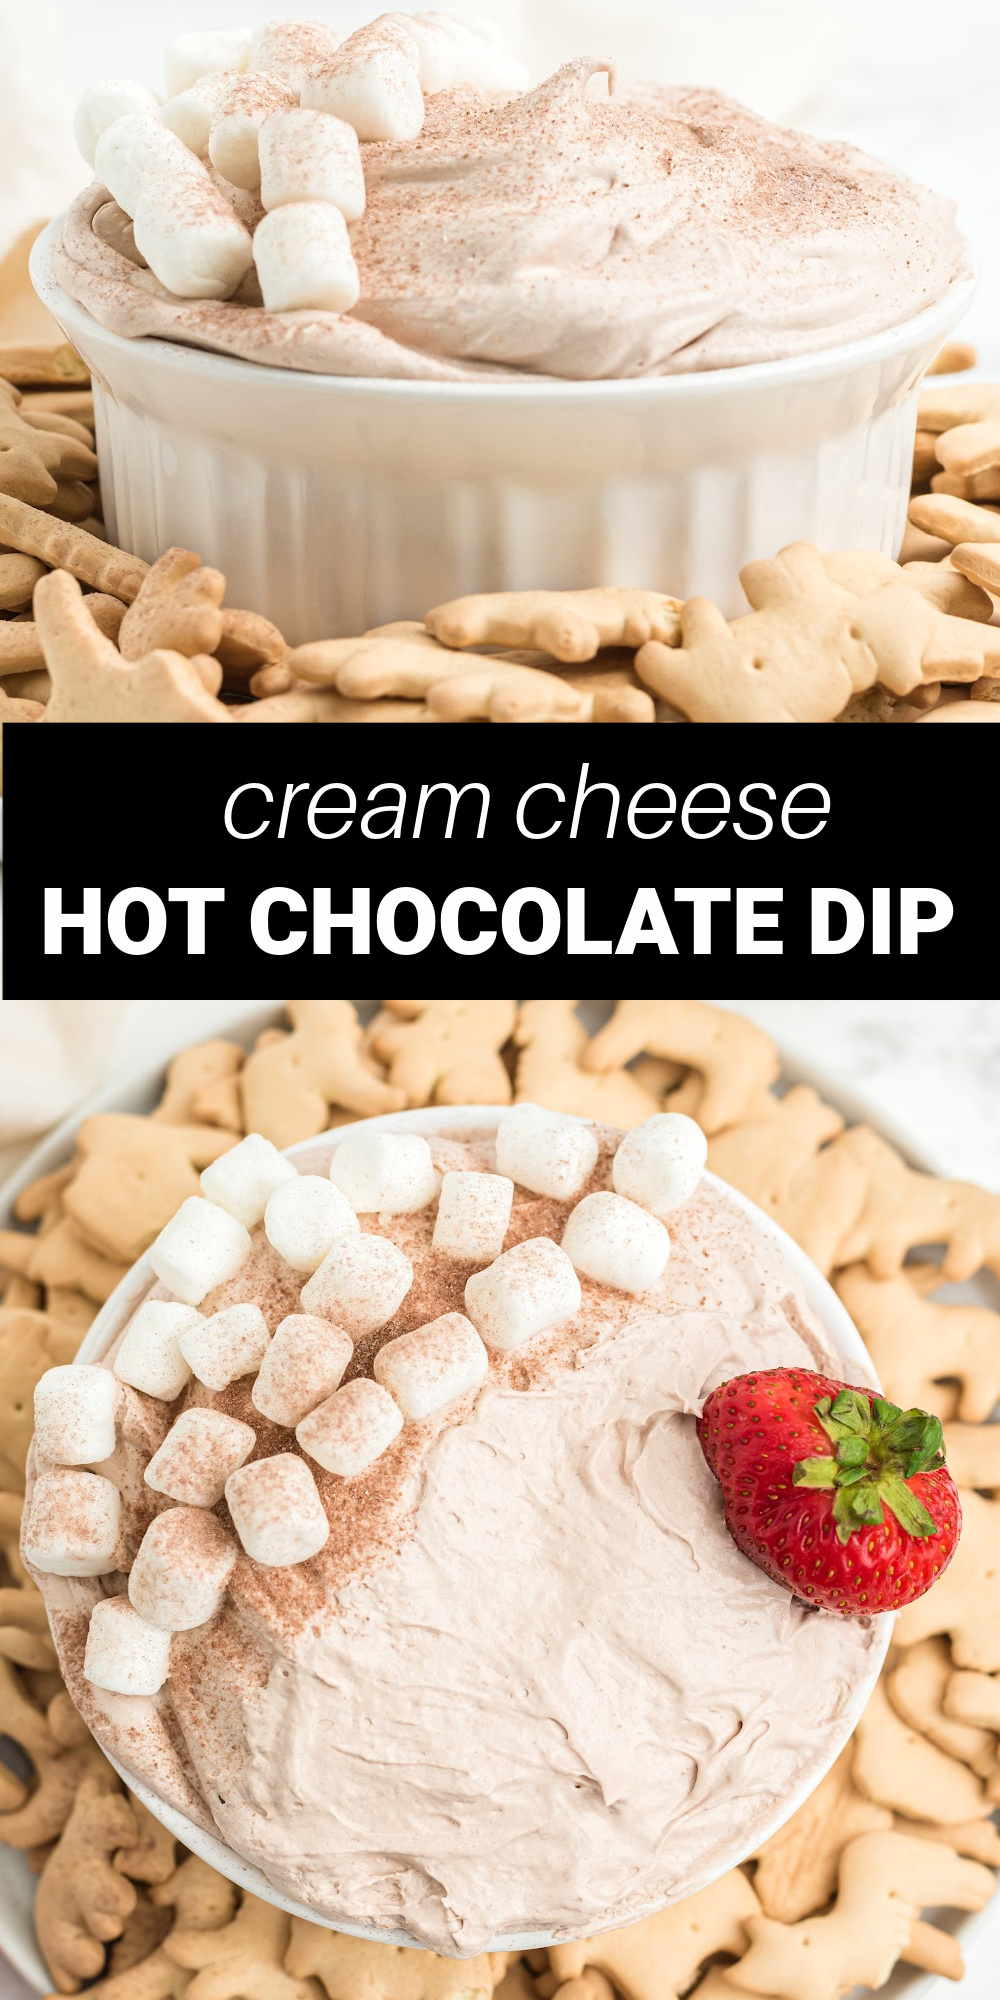 Hot Chocolate Dip is the perfect no-bake sweet treat to enjoy and serve during the holidays and throughout the cold winter months. Turn regular hot cocoa mix and marshmallow cream into a super creamy, super chocolatey appetizer or dessert - with only 5 ingredients!